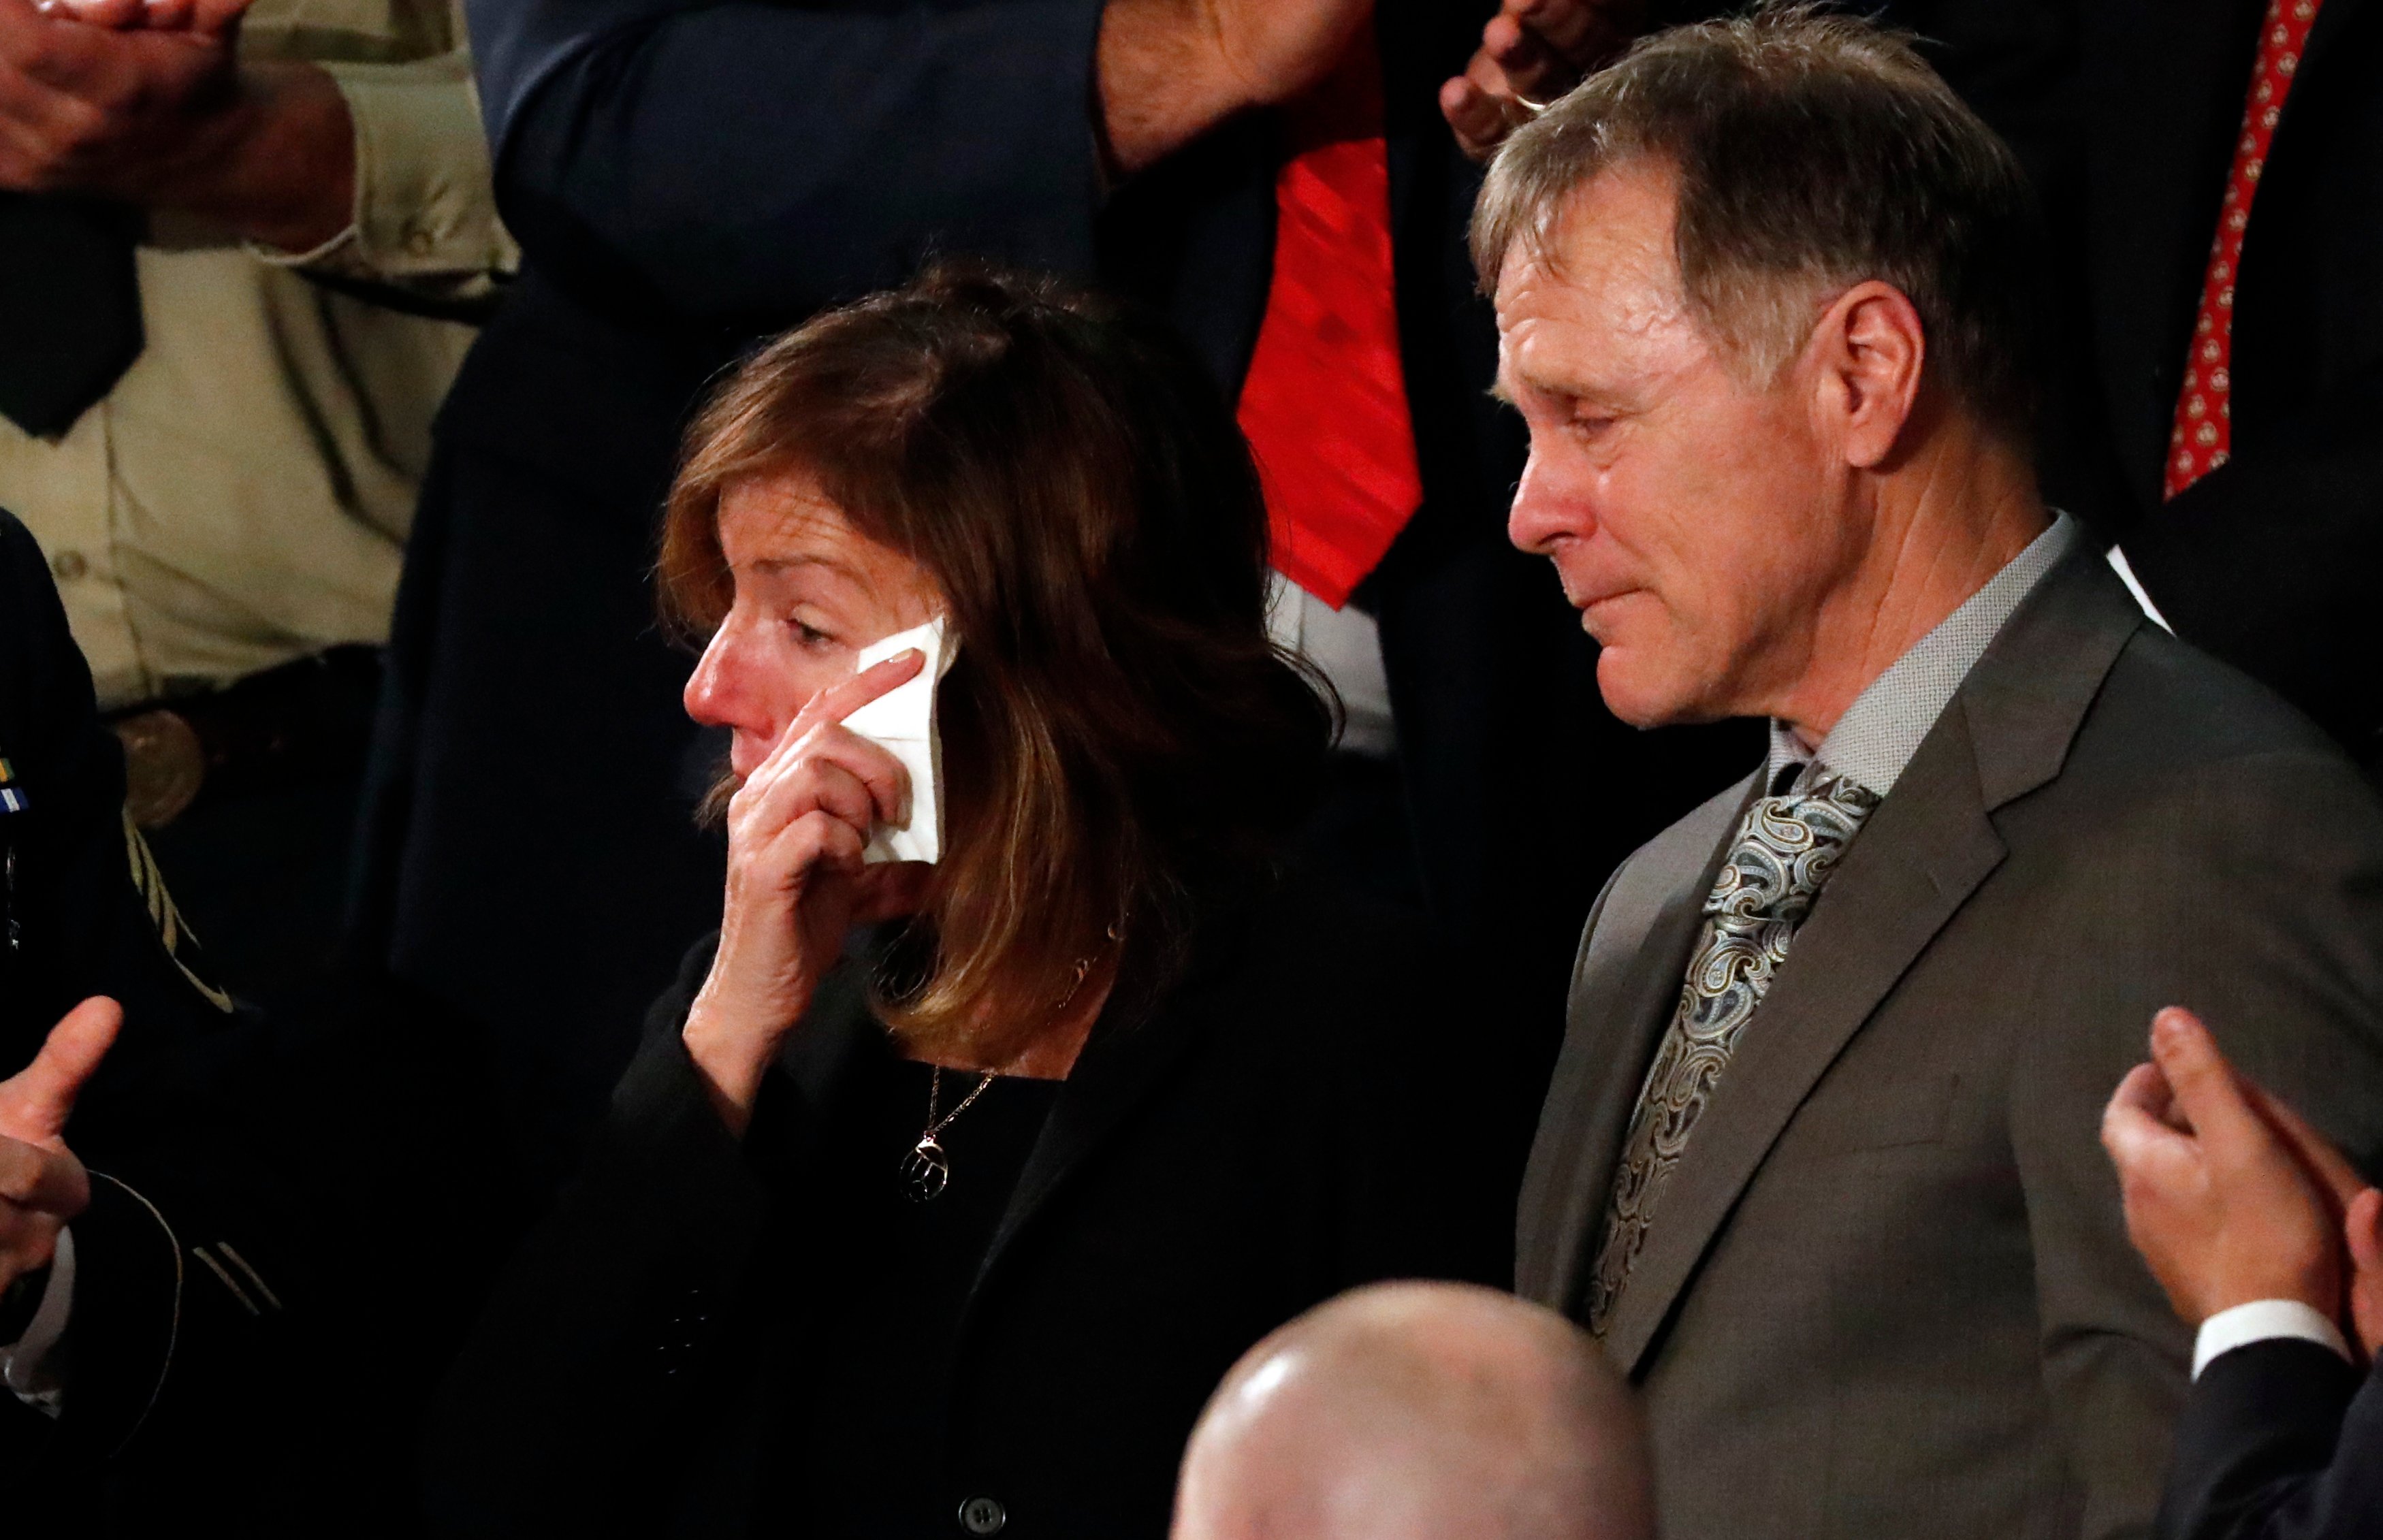 American student Otto Warmbier's parents Fred and Cindy Warmbier cry as U.S. President Donald Trump talks about the death of their son after his arrest in North Korea during the State of the Union address to a joint session of the U.S. Congress on Capitol Hill in Washington, U.S. January 30, 2018. REUTERS/Leah Millis 